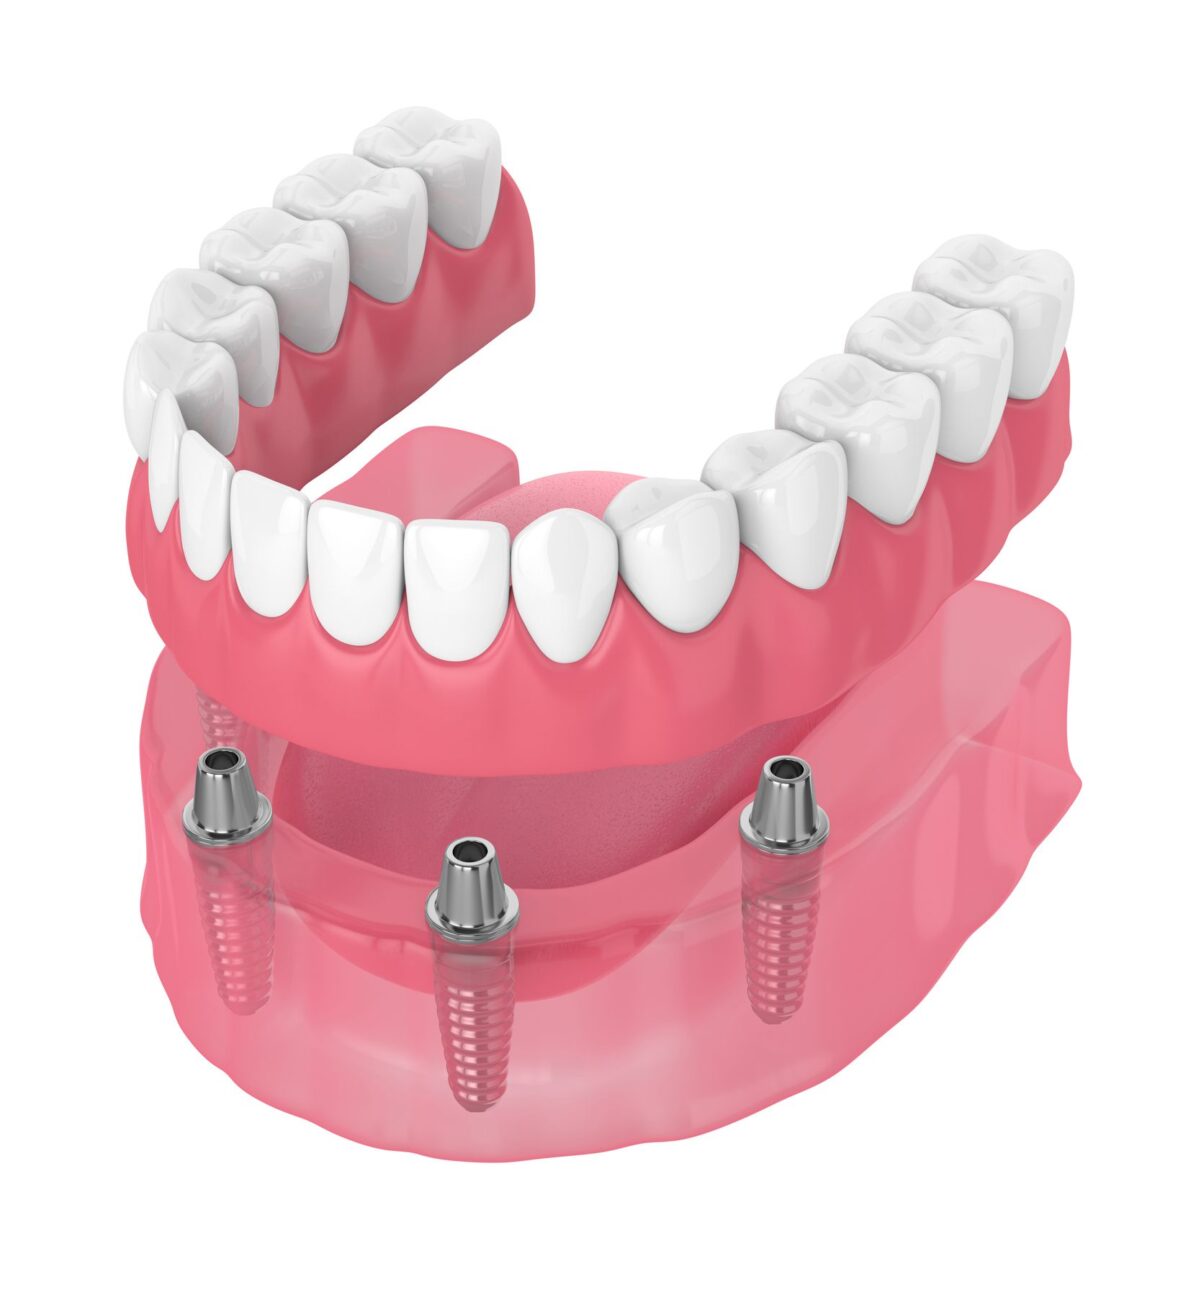 all-on-four dental implants in Plano Texas